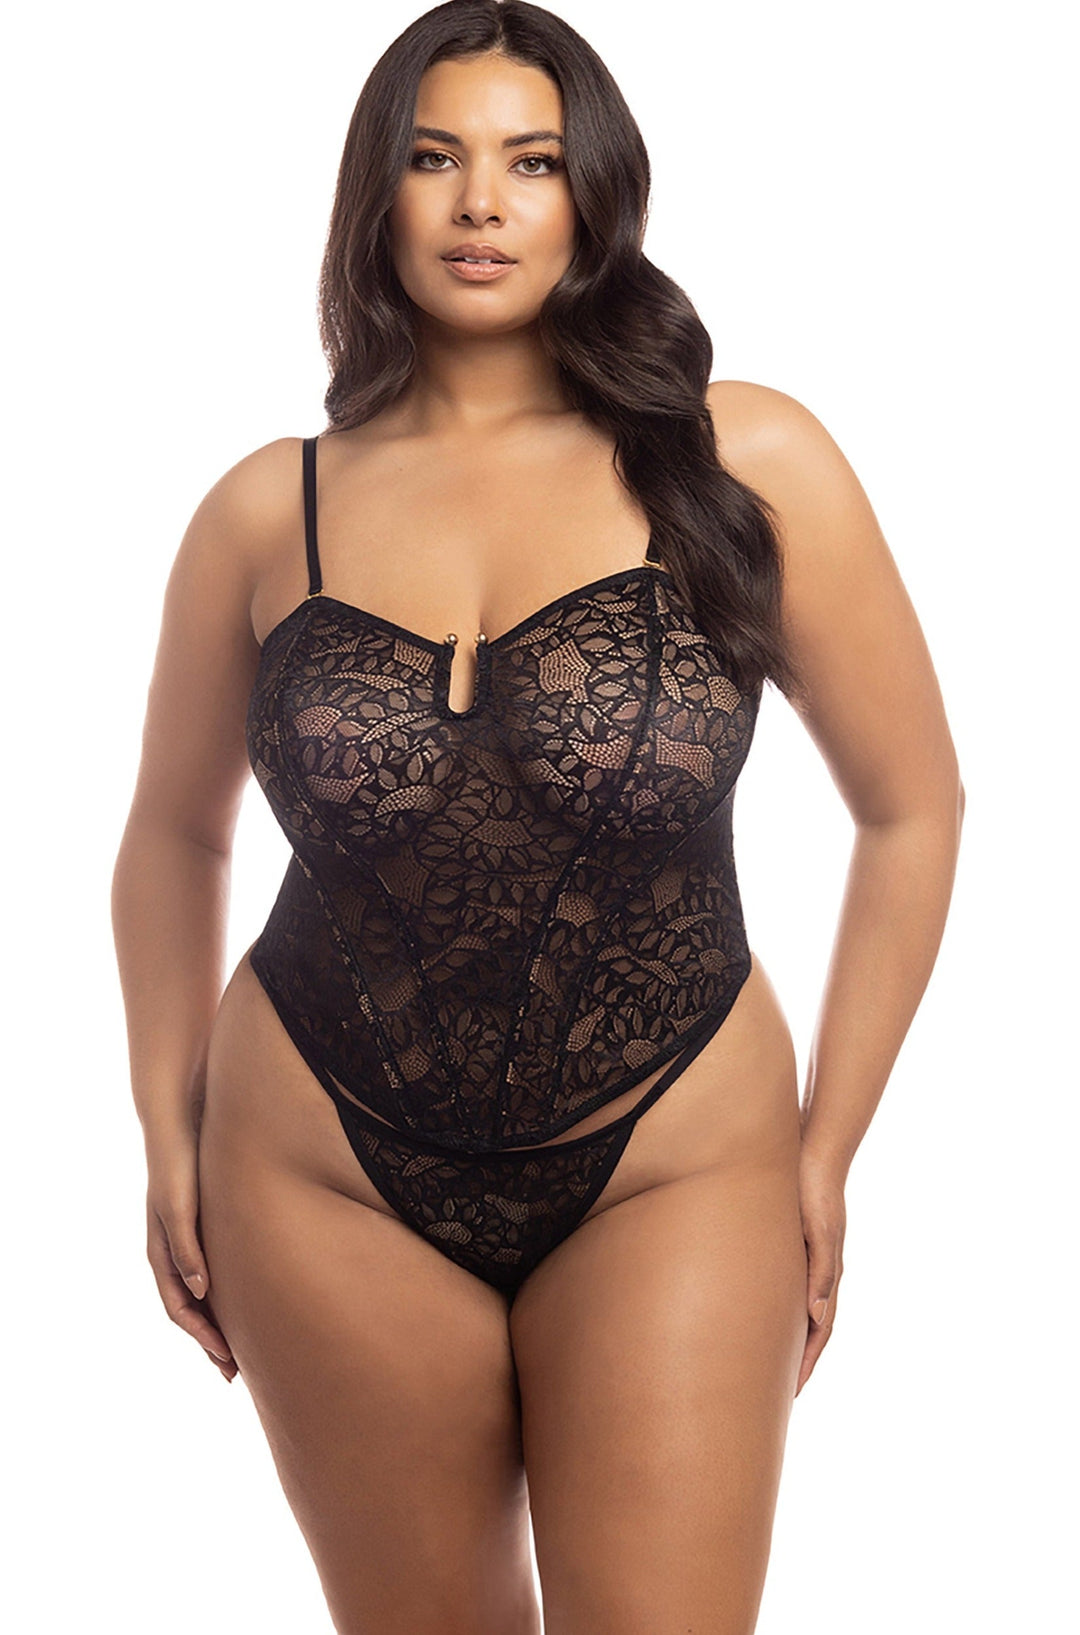 Snake Allover Lace Bustier With Boning Inserts Set